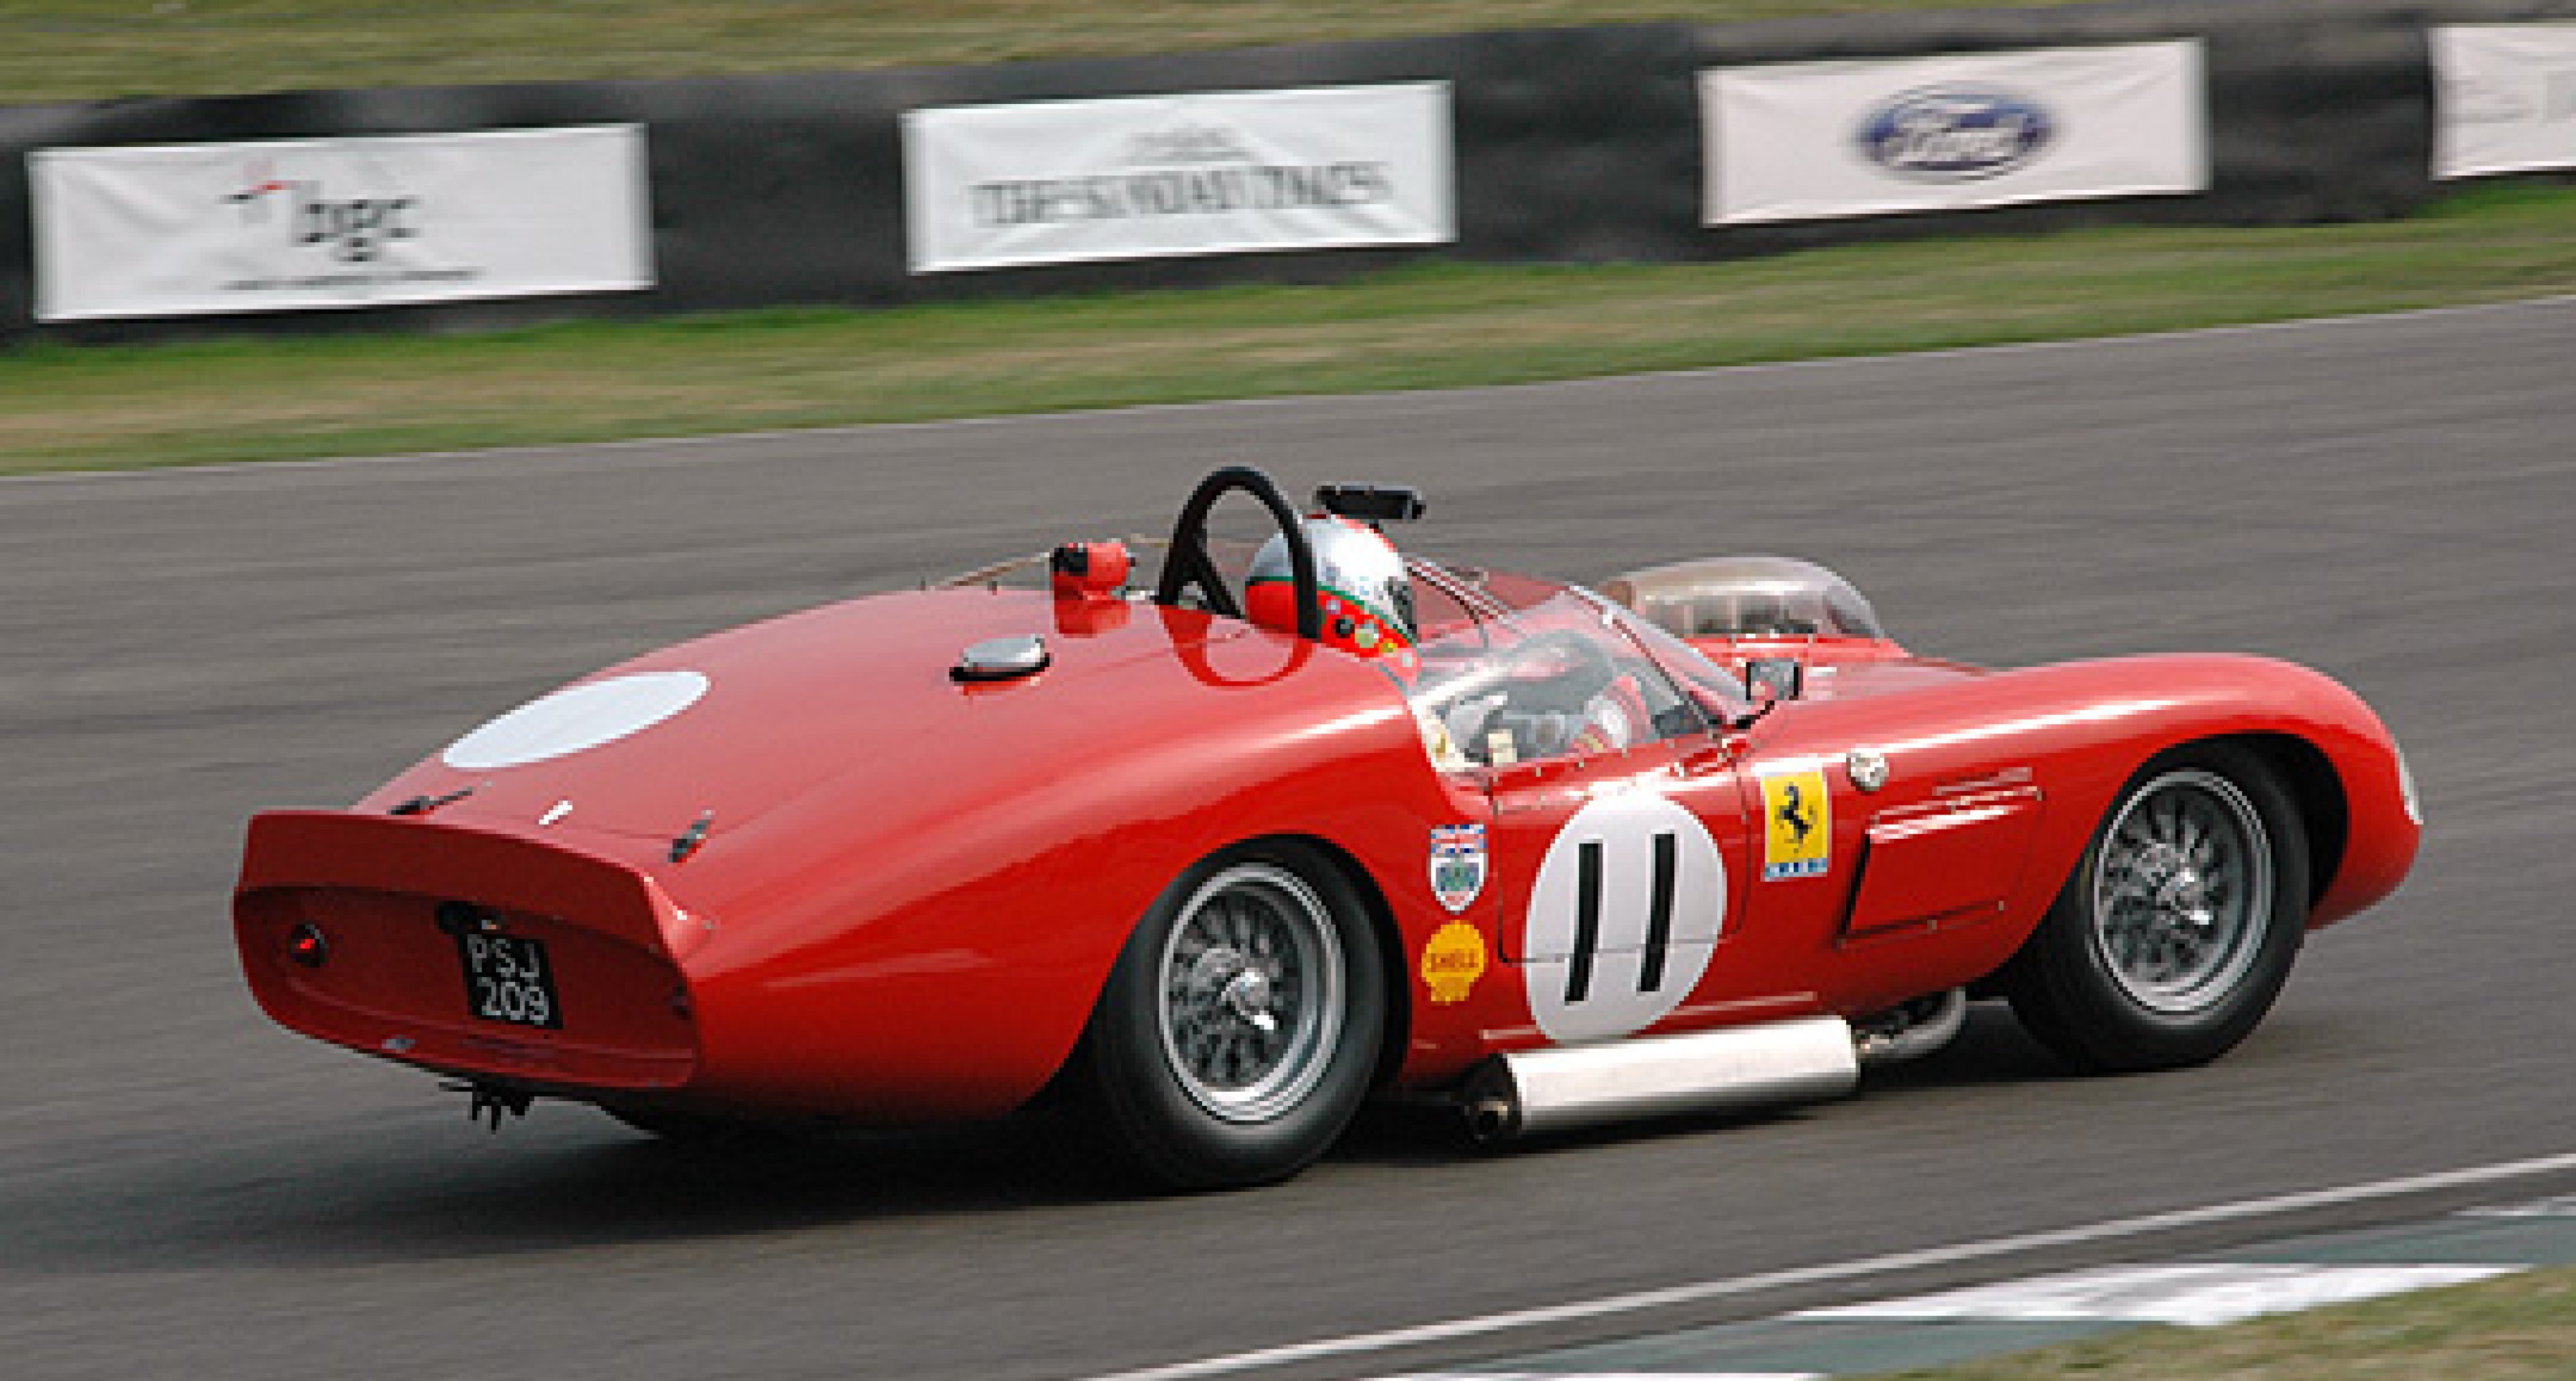 The 2009 Goodwood Revival